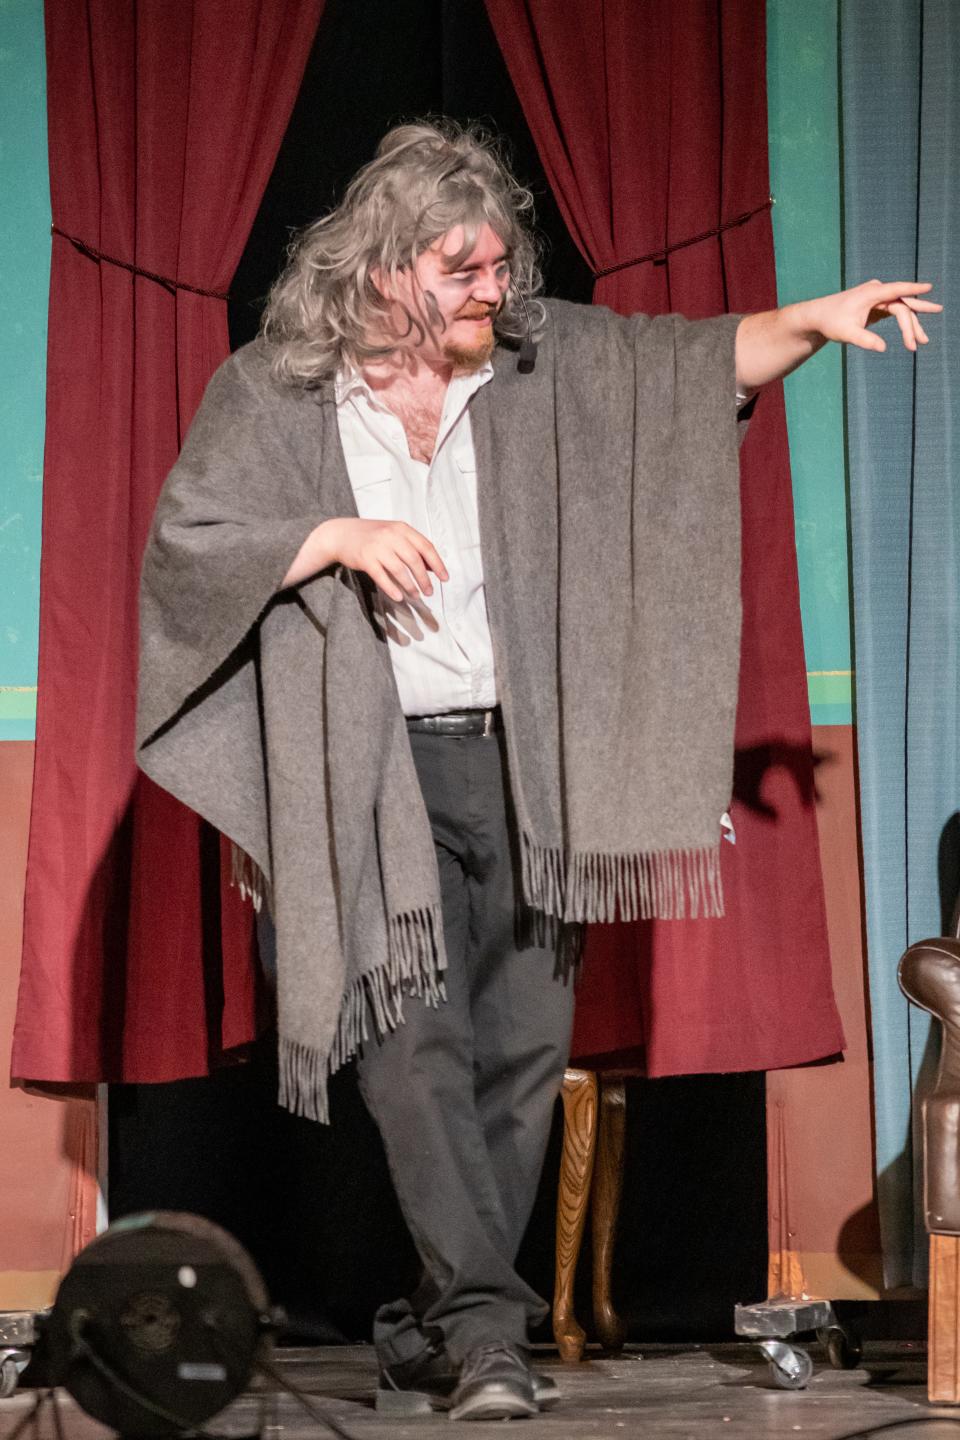 David Wolverton portrays Mr. Hyde. Wolverton is also producing the play, which begins today at the Cambridge Performing Arts Center.